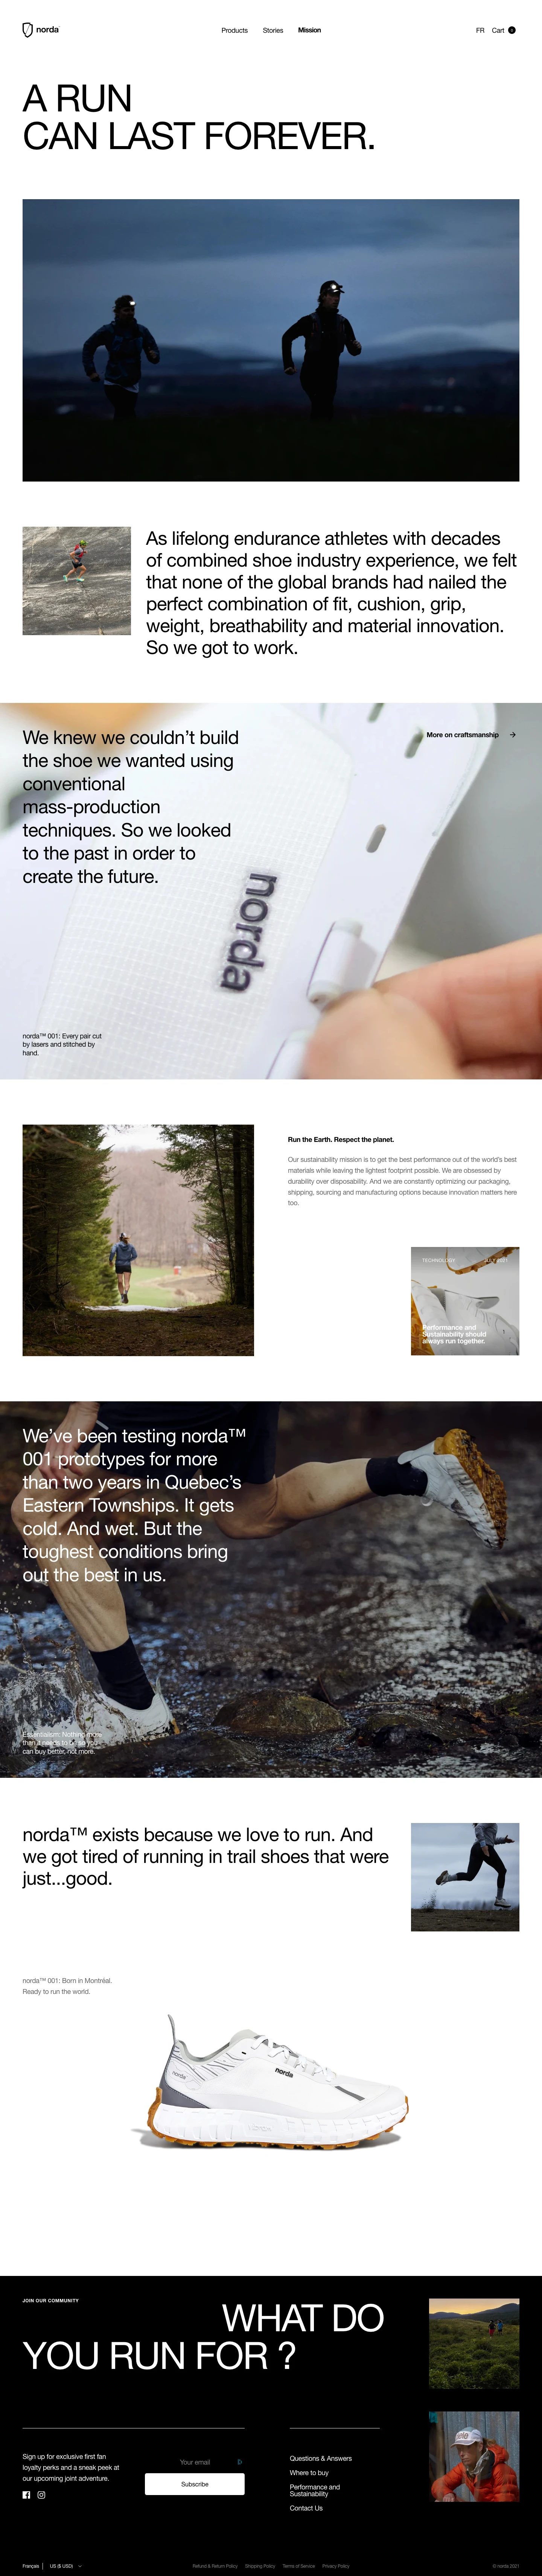 norda run Landing Page Example: We couldn’t find a trail shoe that was tough enough, light enough or fast enough to take us where we wanted to go. So we created it.